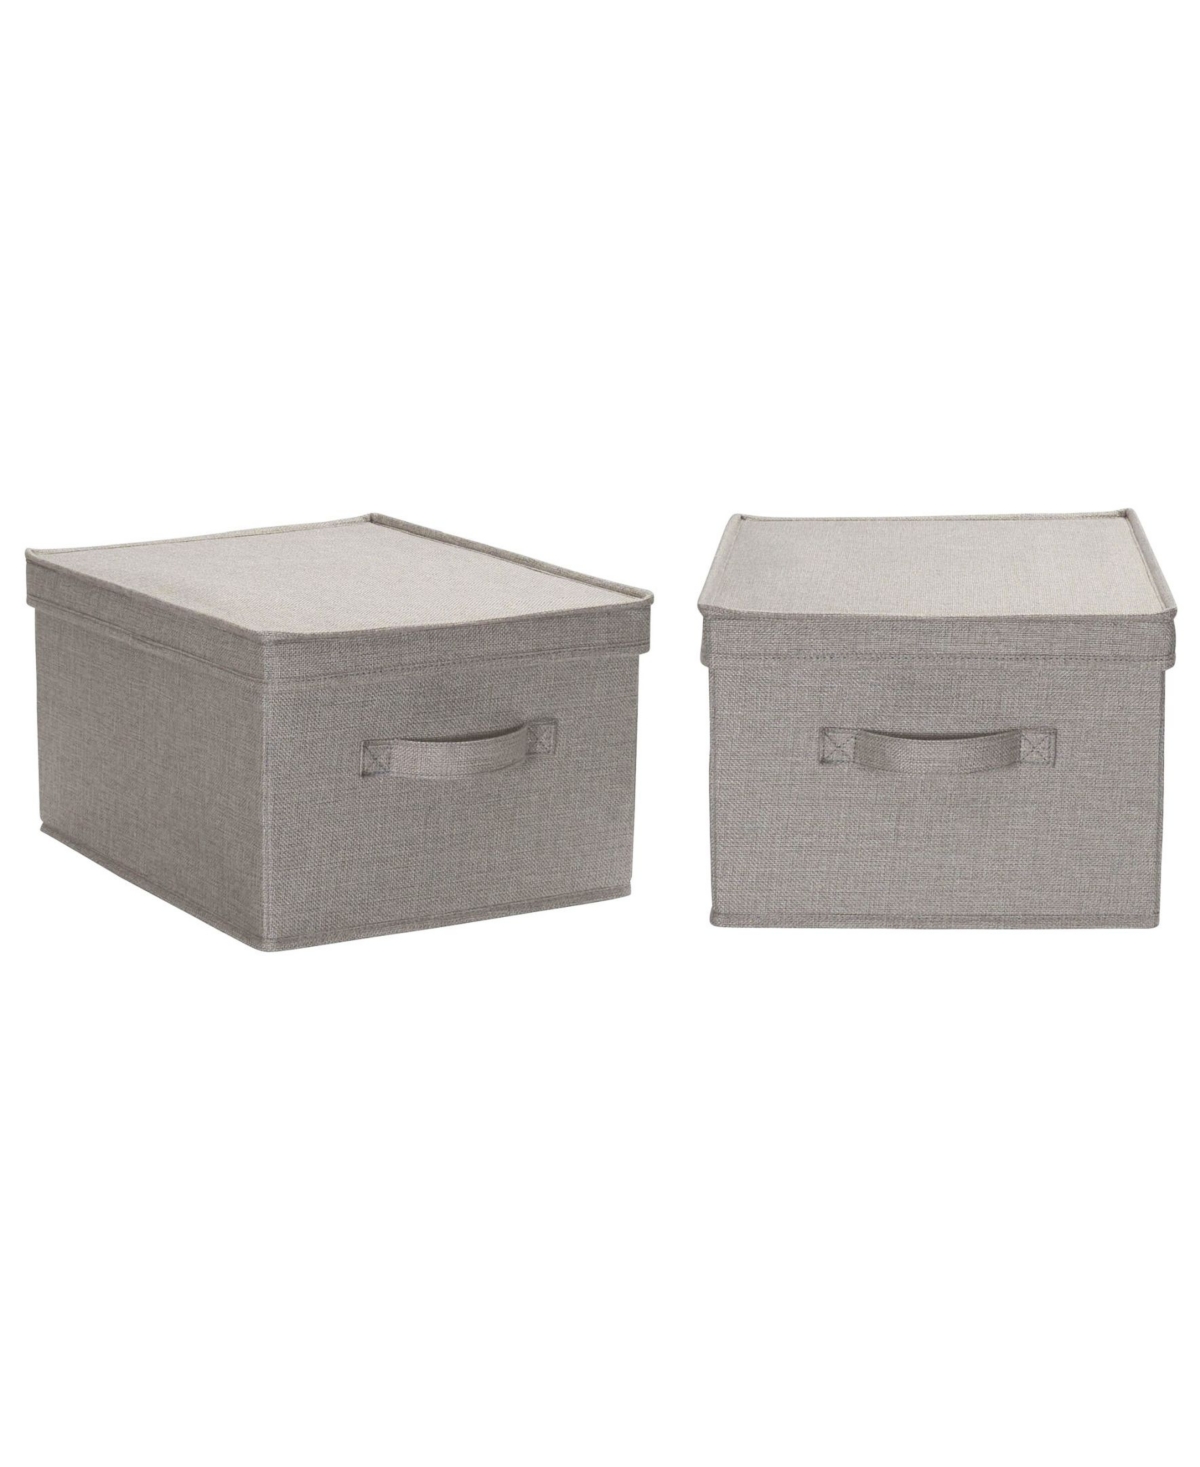 Household Essential Large Fabric Storage Bins 2 Pack - Gray